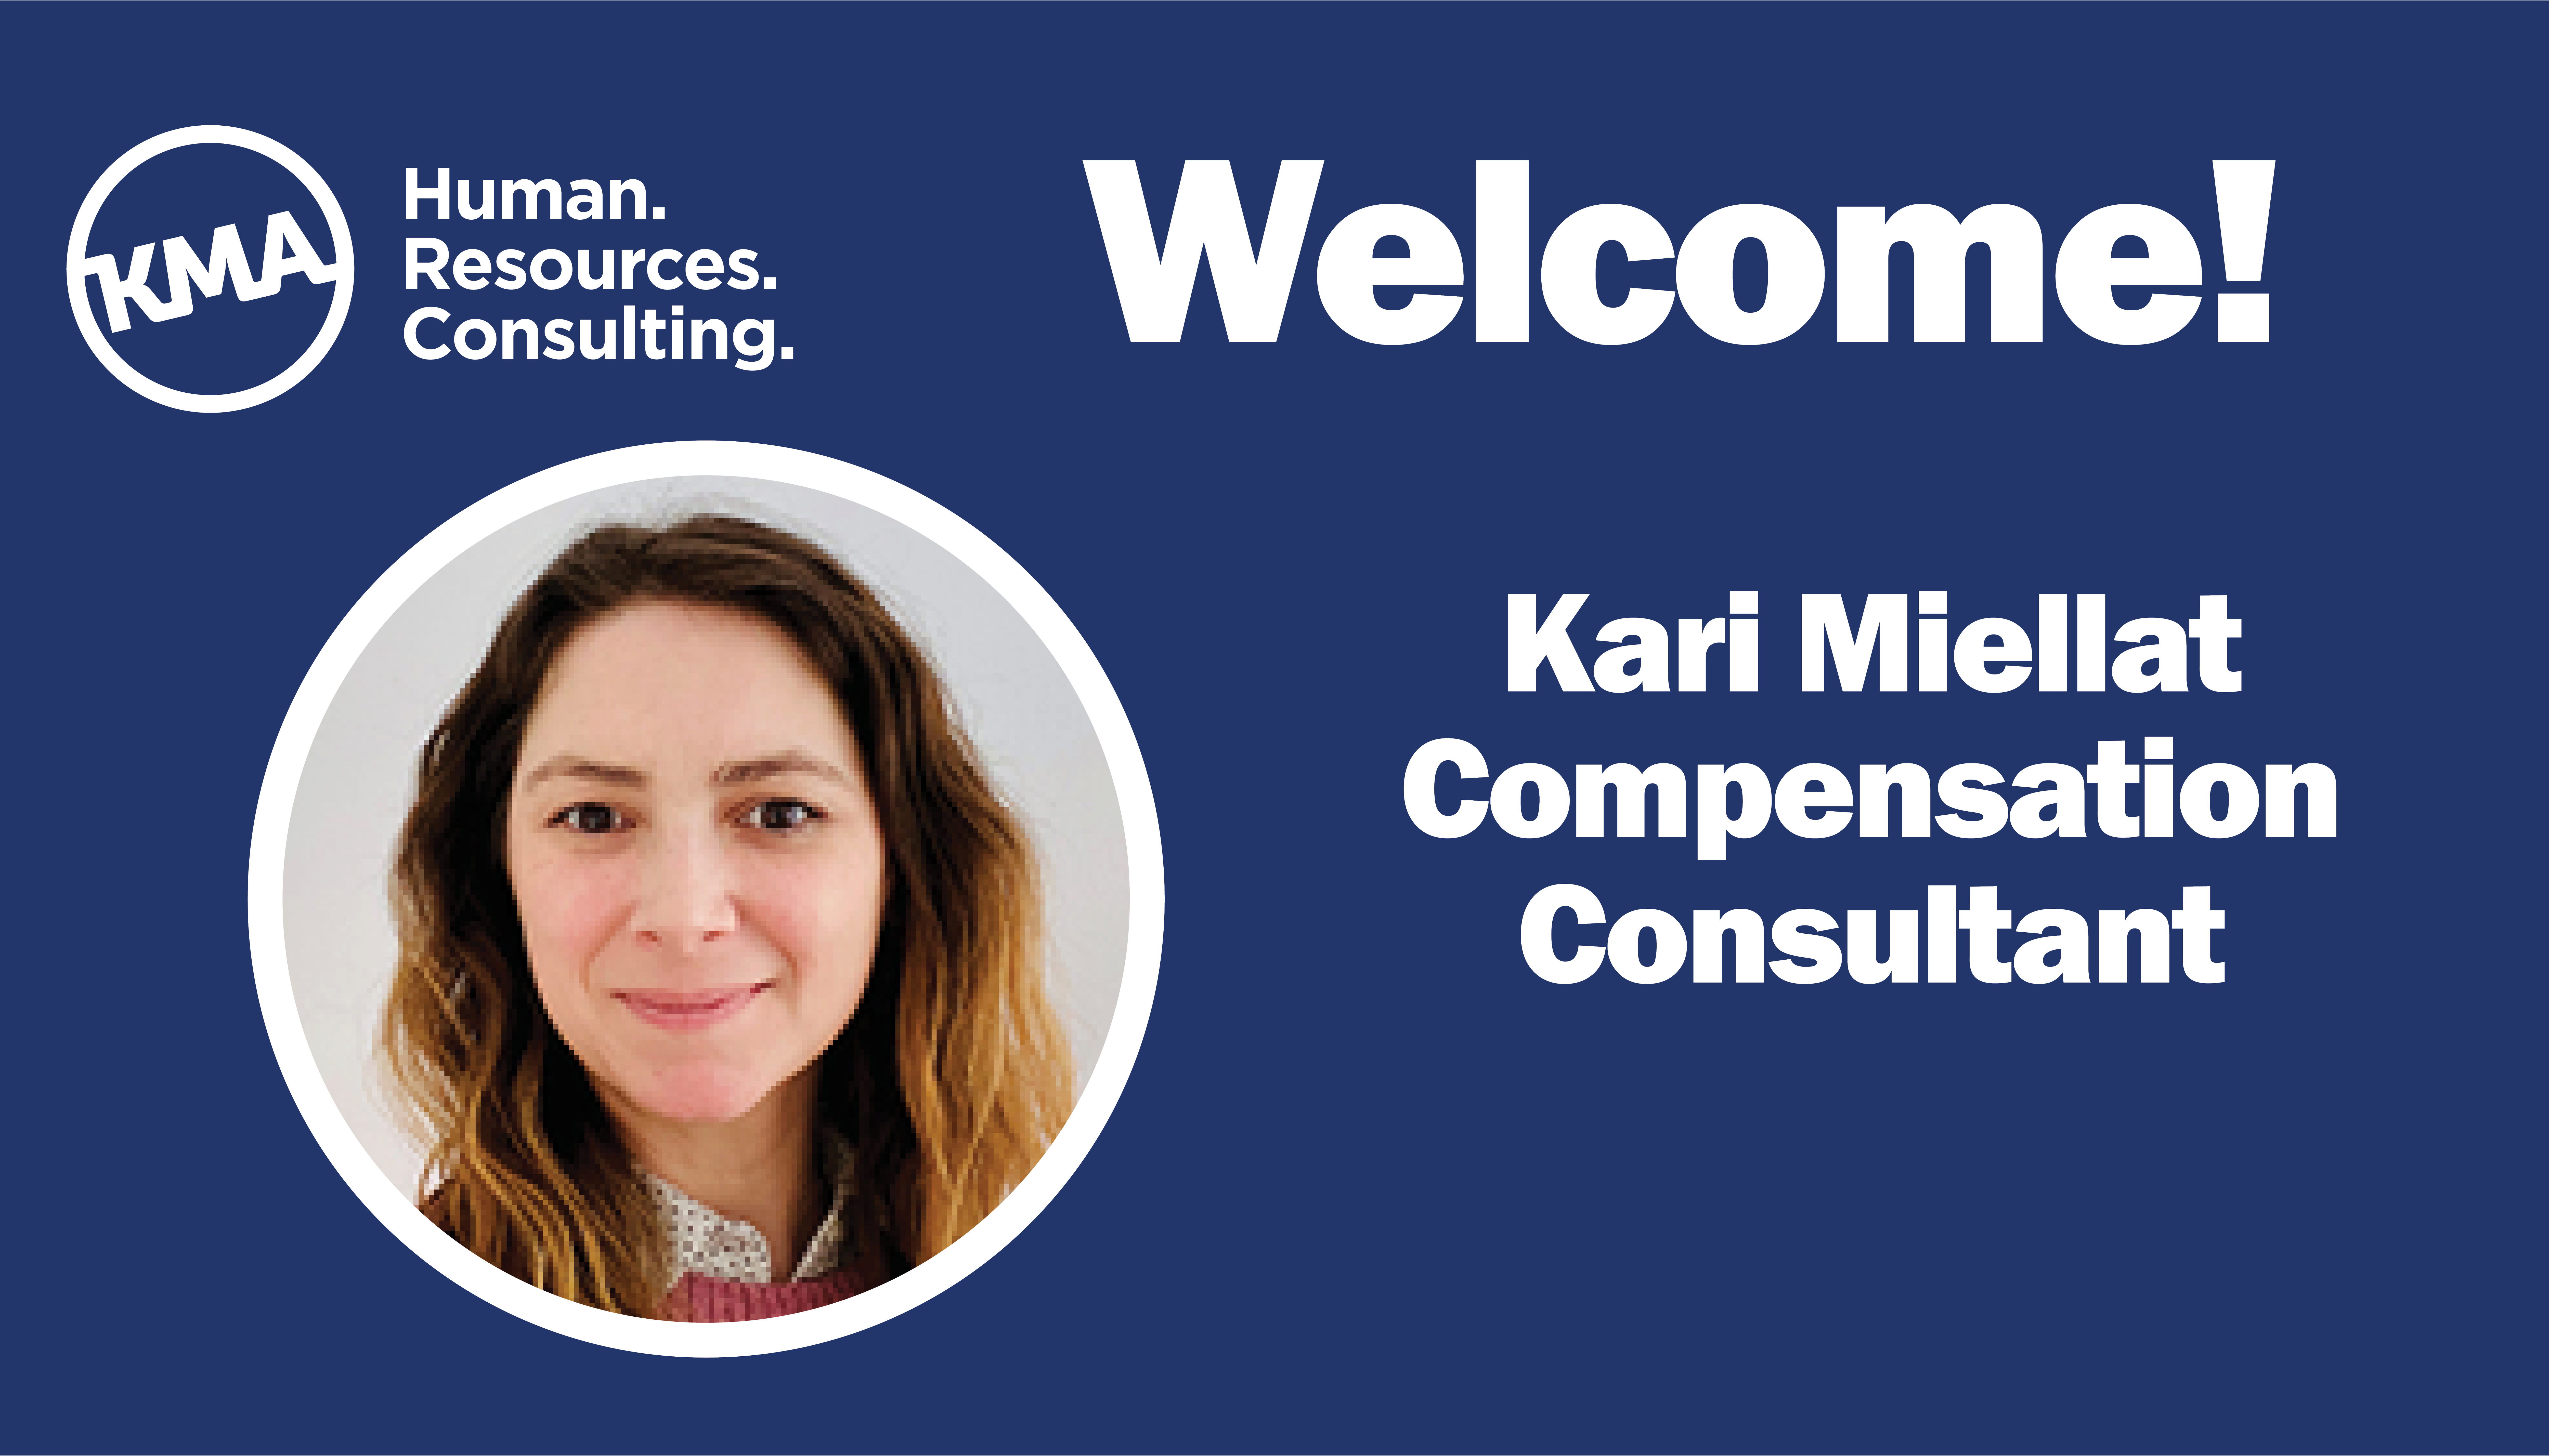 KMA Welcomes Kari Meillat, Compensation Consultant